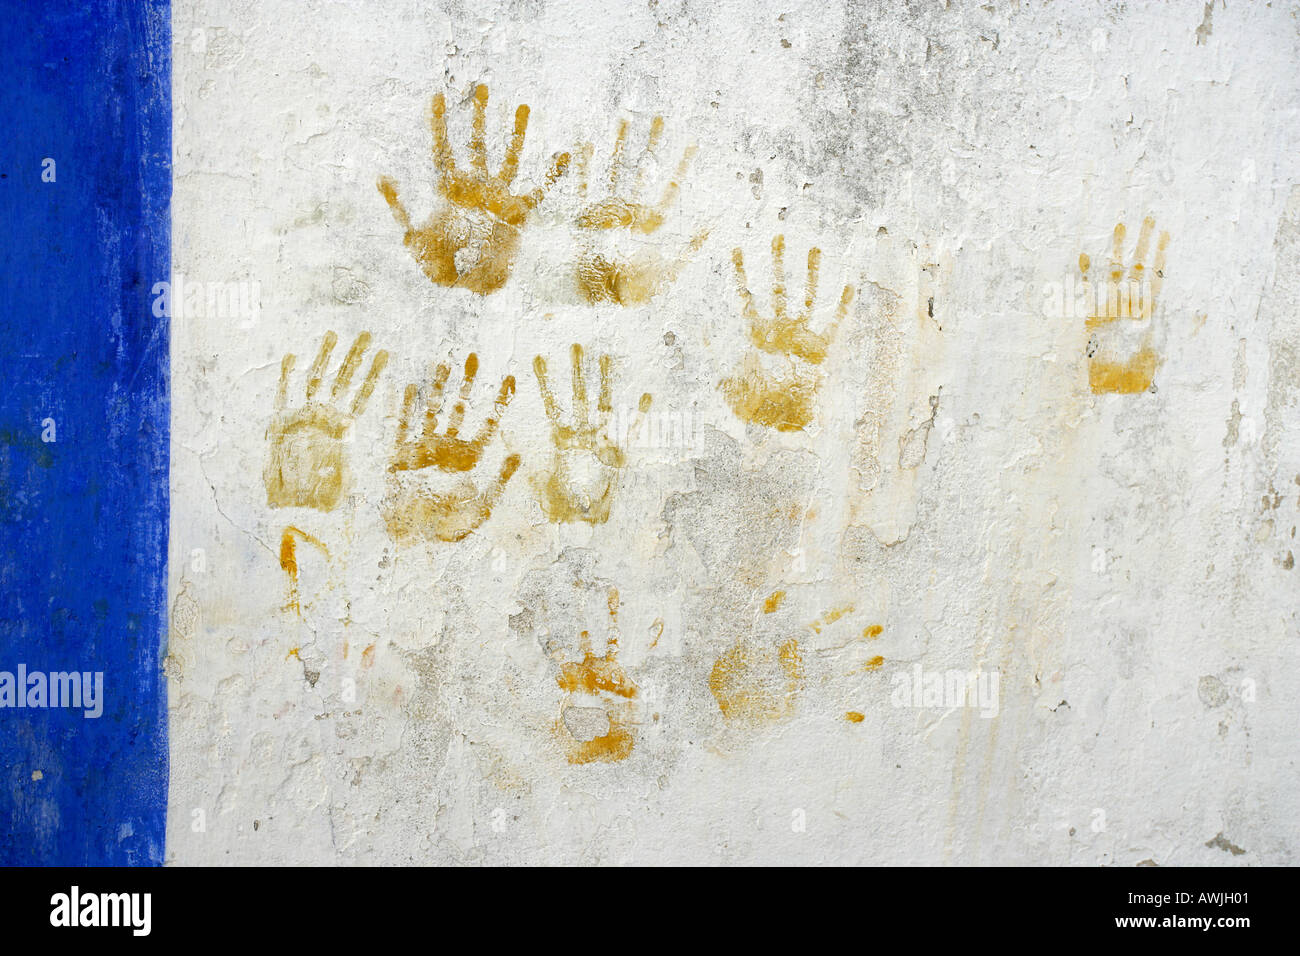 Painted hand prints made on a white washed wall found in Óbidos Portugal Stock Photo